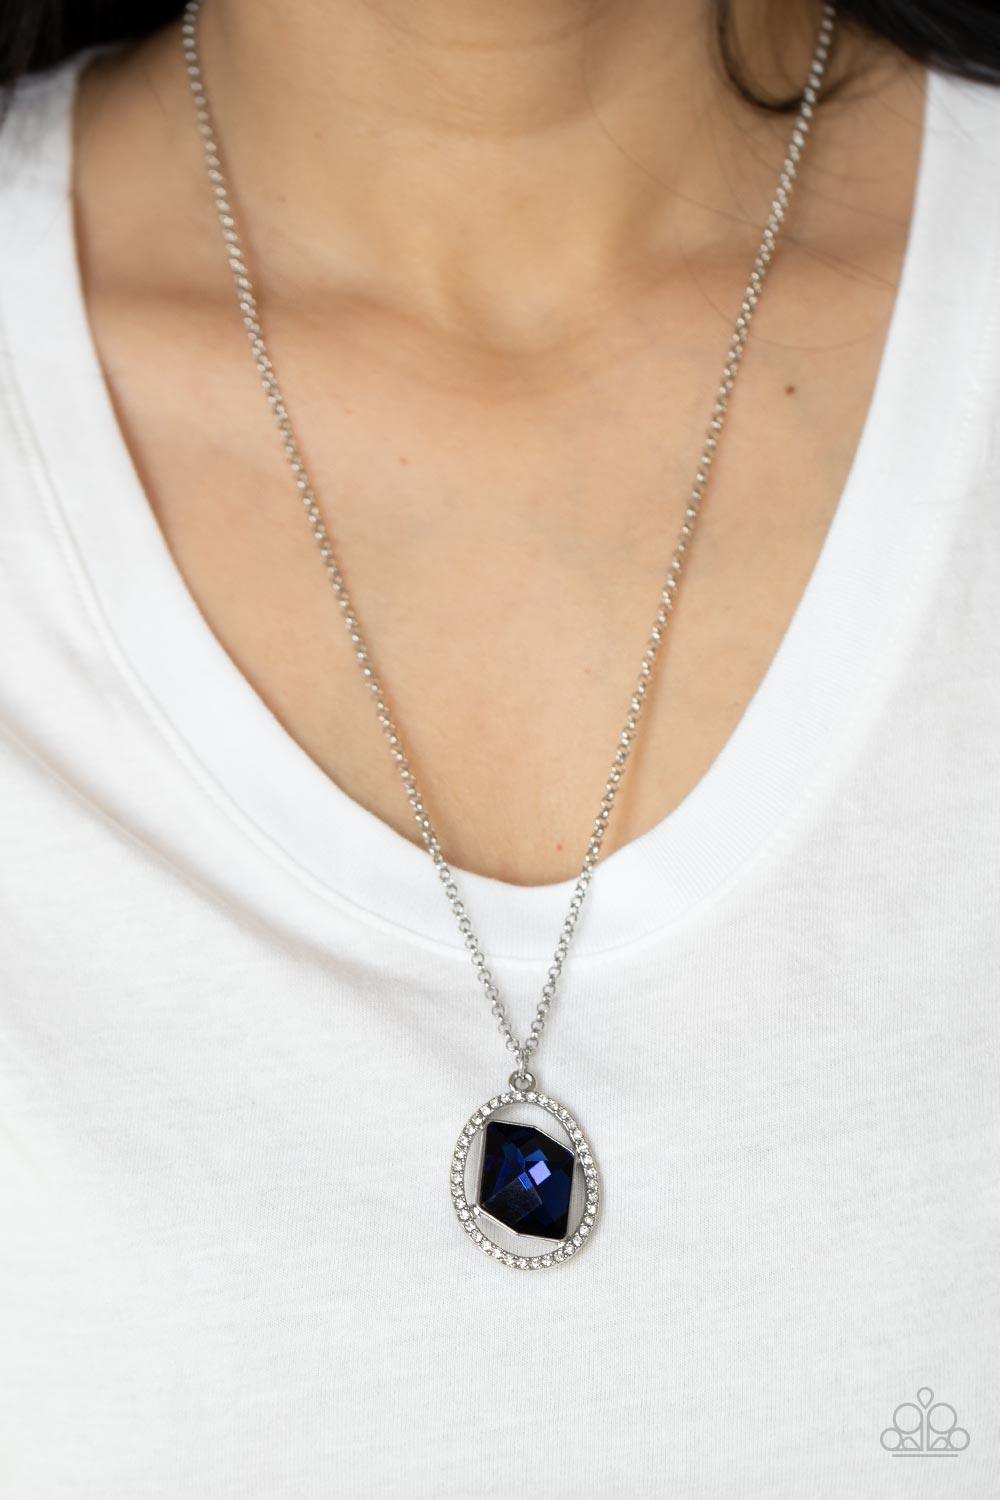 Undiluted Dazzle Blue Necklace - Jewelry by Bretta